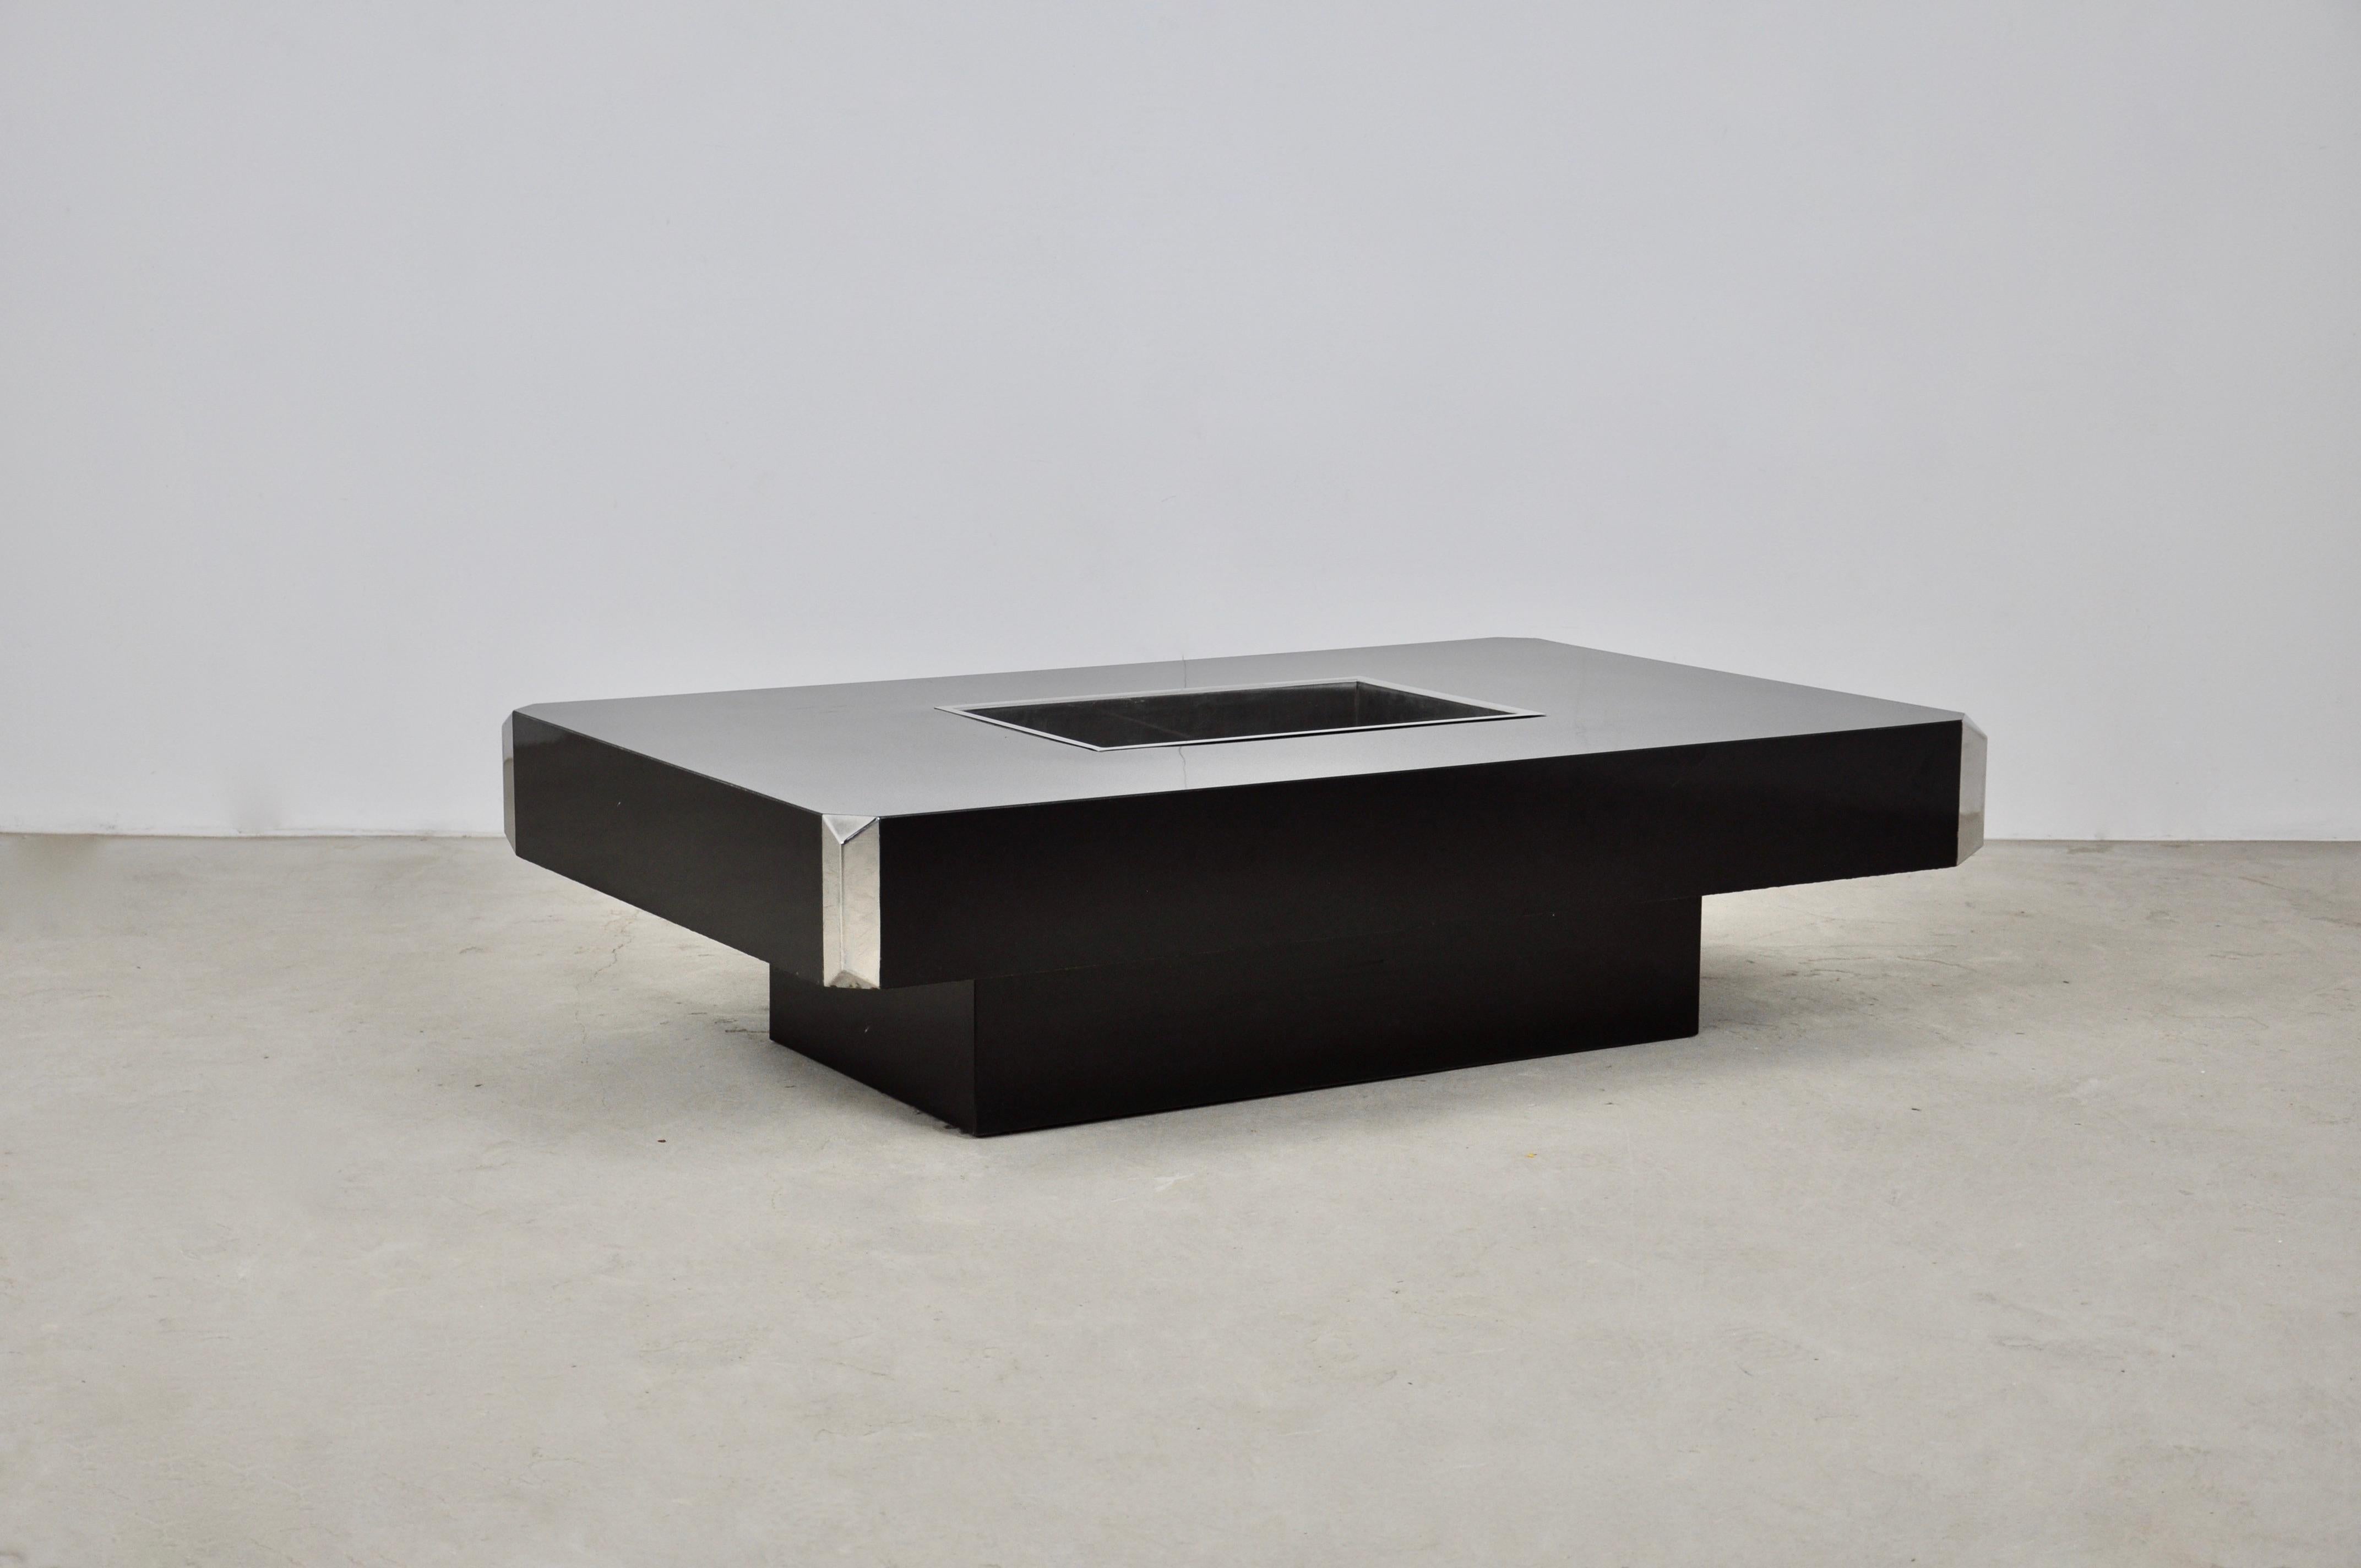 Coffee table in black bakelite and chrome metal. Wear due to the age of the coffee table.